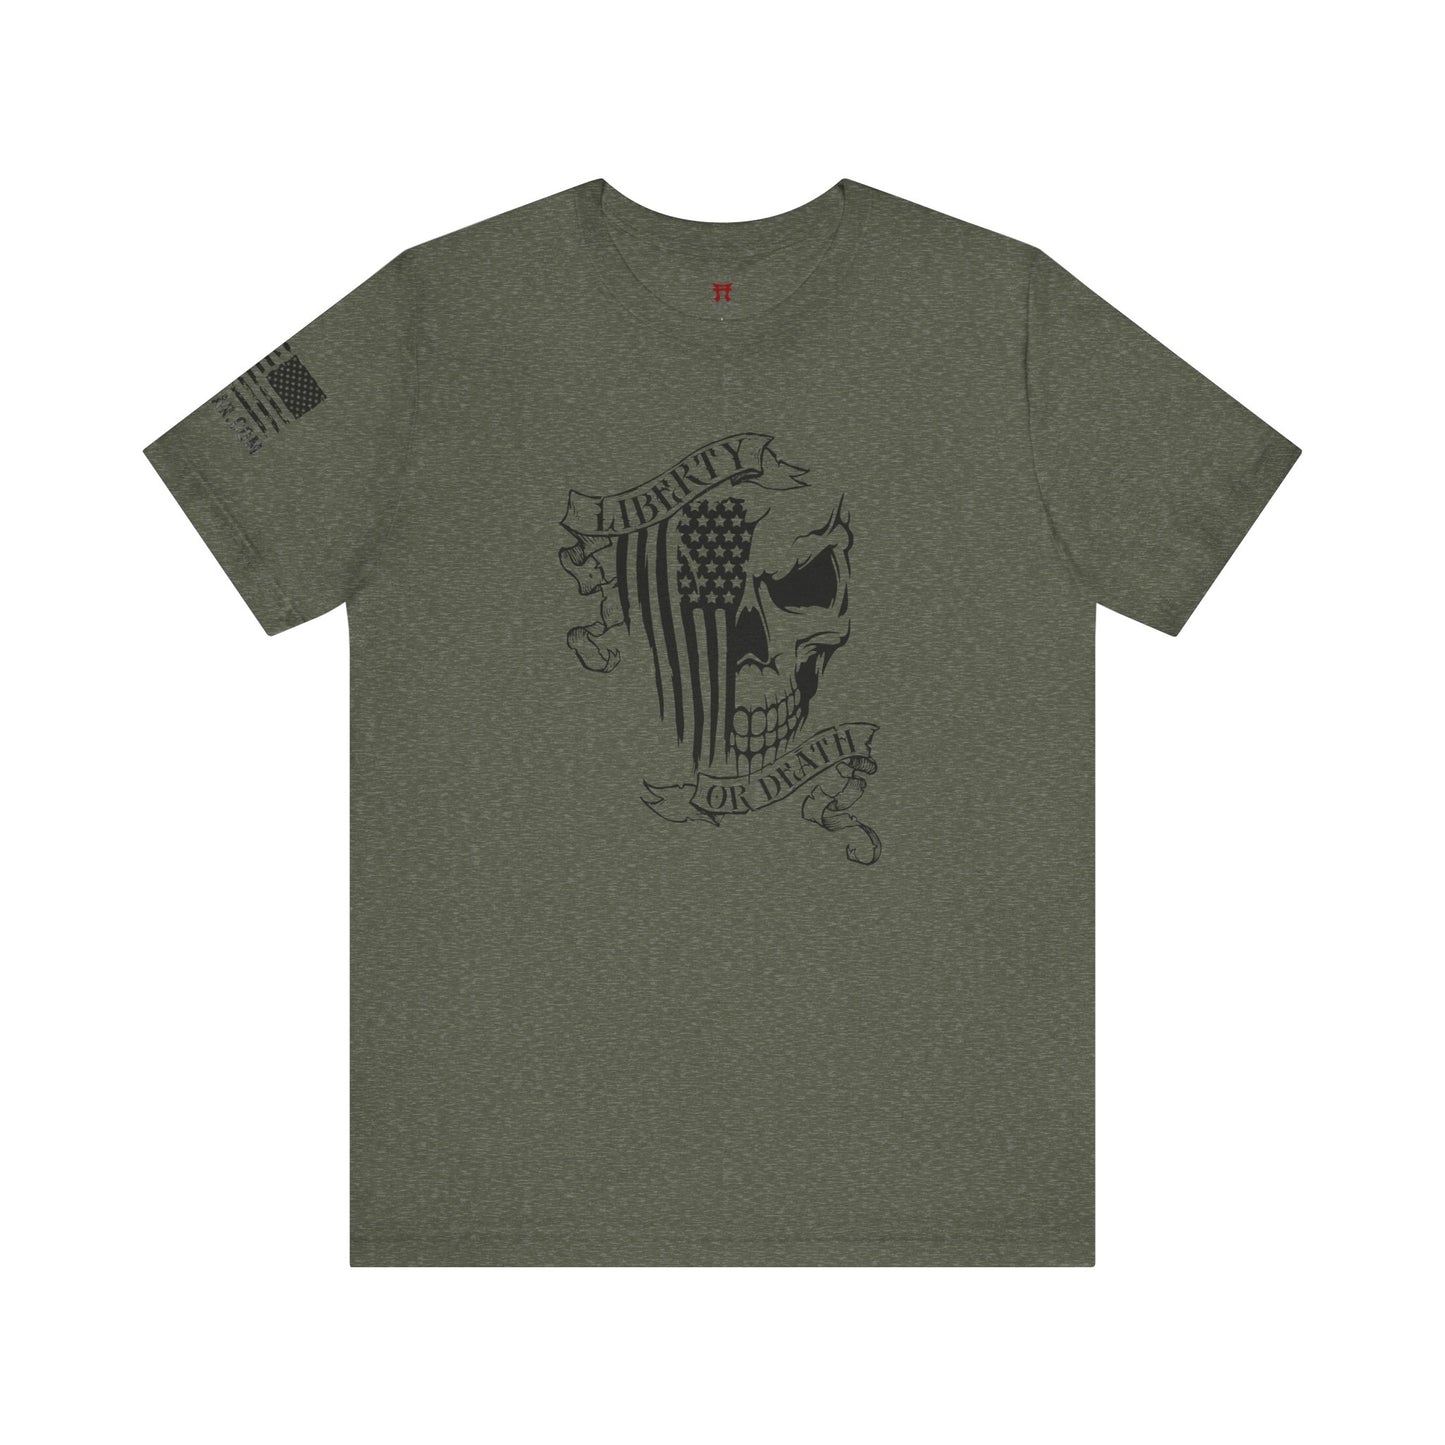 Rakkgear Liberty Or Death Short Sleeve Tee with black print in military green